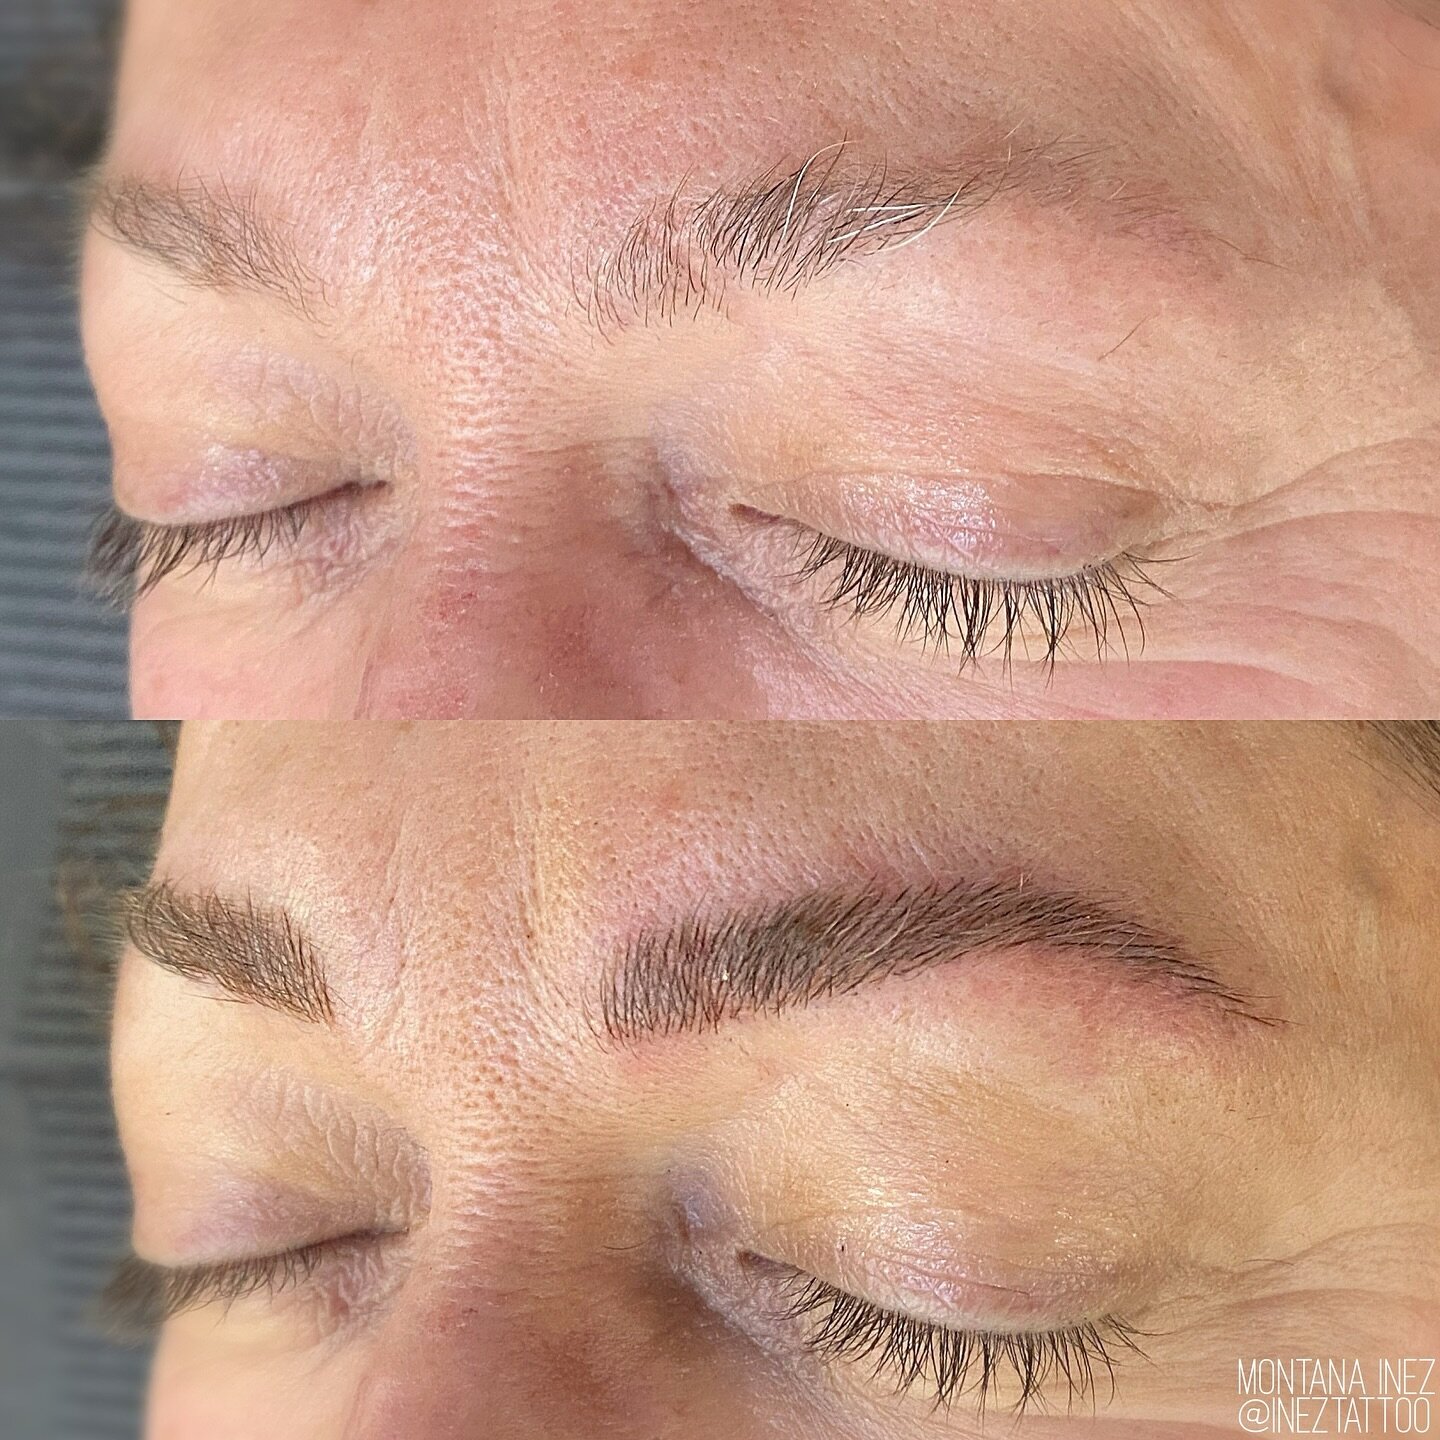 childhood scars and white hairs, be gone! ✨

before + immediately after microblading

&ldquo;what will my white/grey/blonde brow hairs look like with microblading?&rdquo; is a super common question we get!

the white hairs are still there in the afte